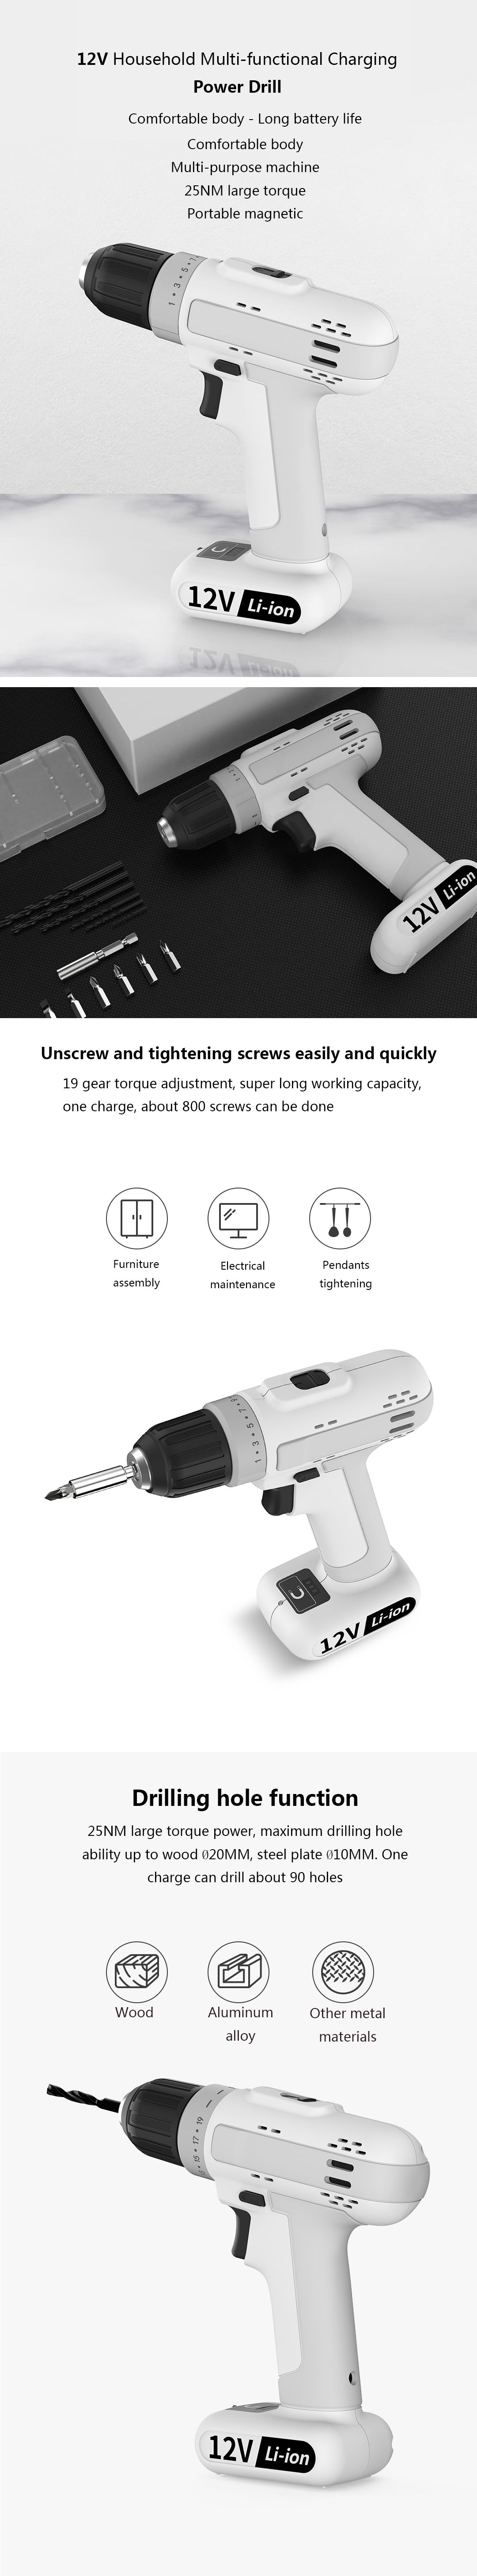 Intelligent-12V-Portable-Rechargable-Power-Drill-Multi-used-Li-ion-Battery-Drill-2-Speed-Magnetic-Co-1565958